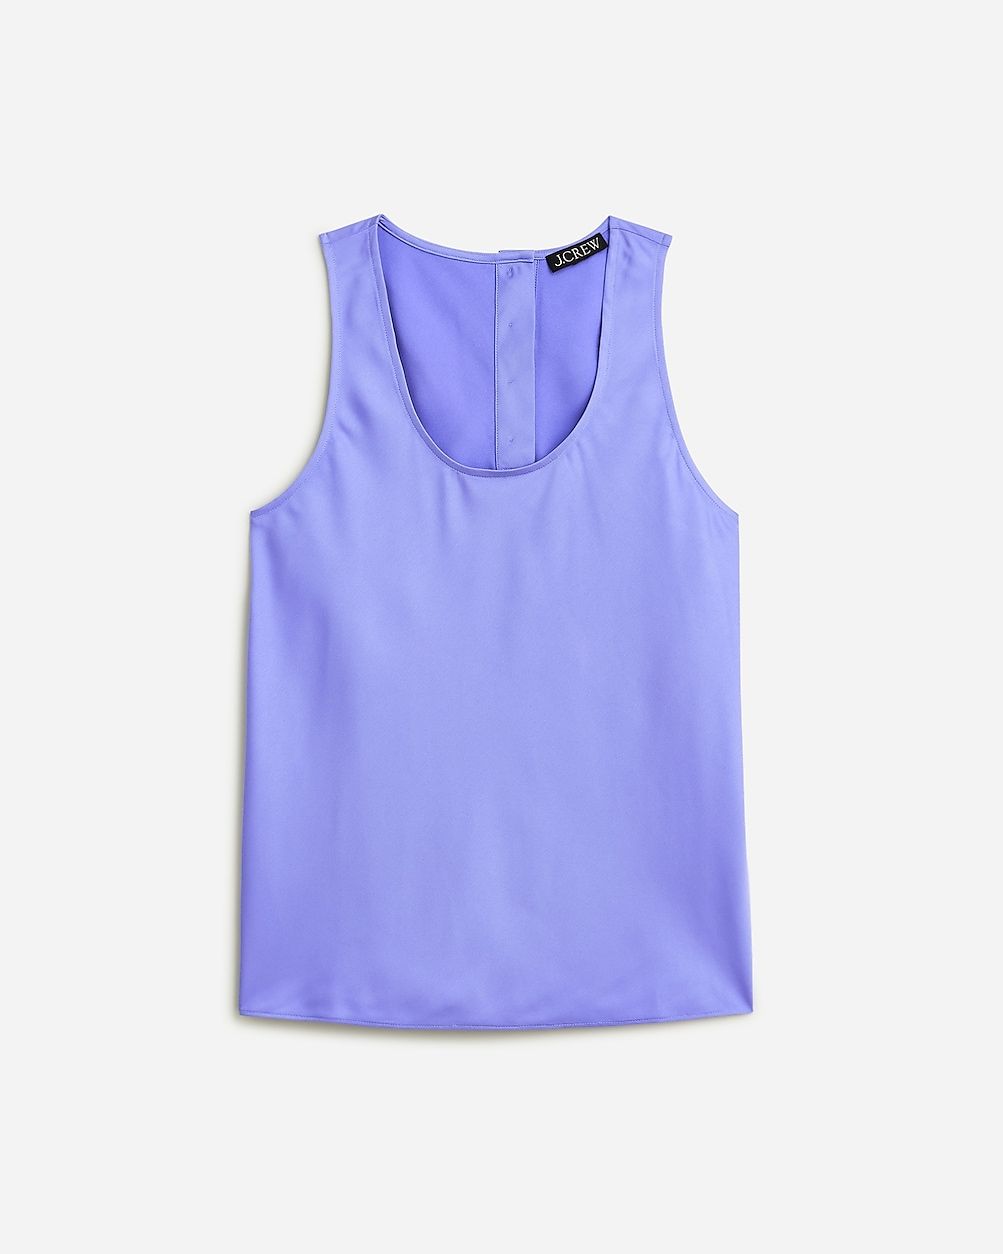 top rated4.4(58 REVIEWS)Sleeveless shell top in everyday crepe$79.50Select Colors$64.99Extra 30% ... | J.Crew US